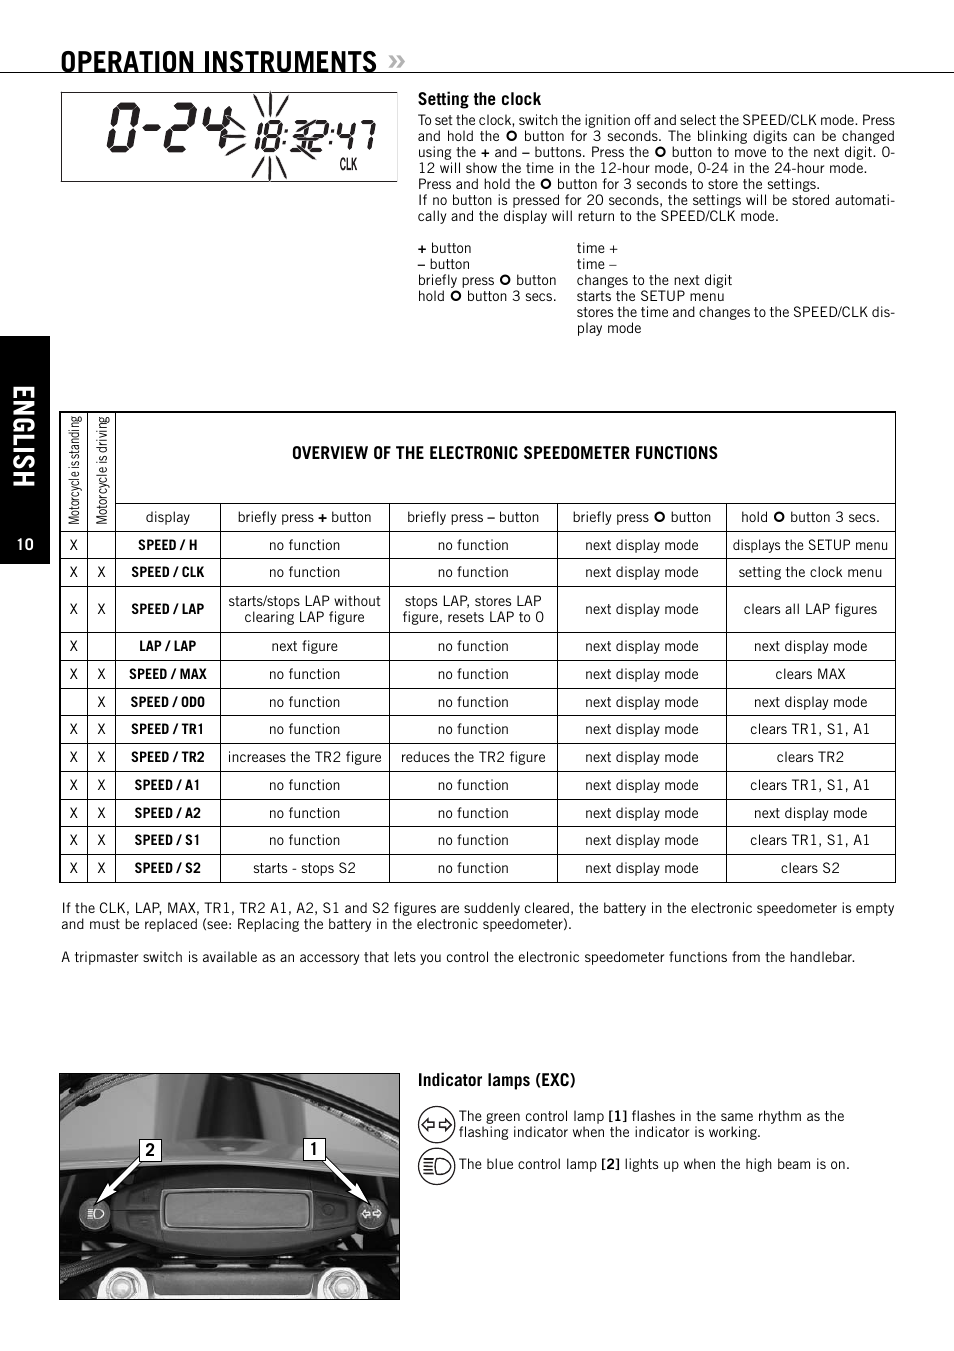 English, Operation instruments | KTM EXC 200 XC DE User Manual | Page 11 /  69